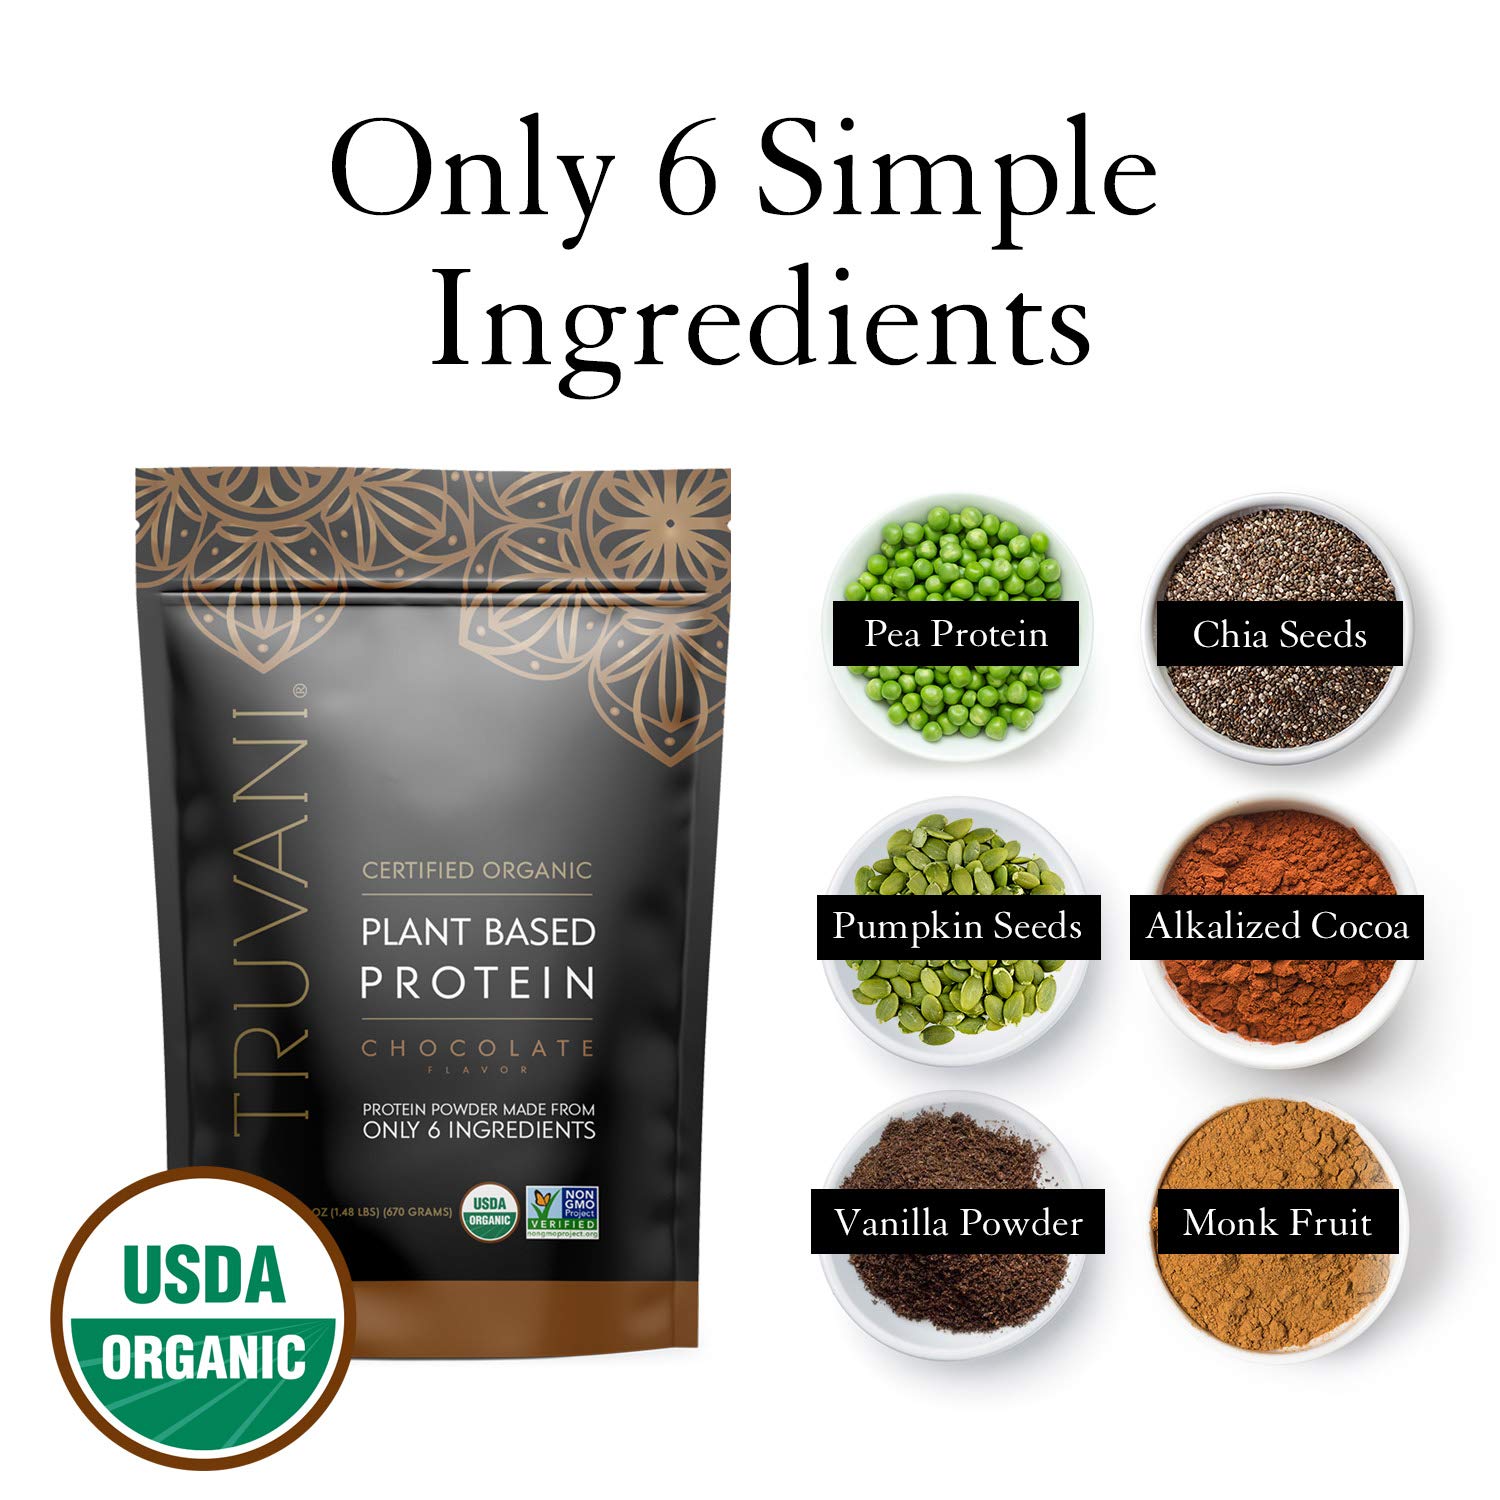 Truvani Vegan Chocolate Protein Powder with Jar, Frother & Scoop Bundle - 20g of Organic Plant Based Protein Powder - Includes Glass Jar, Portable Mini Electric Whisk & Durable Protein Powder Scoop